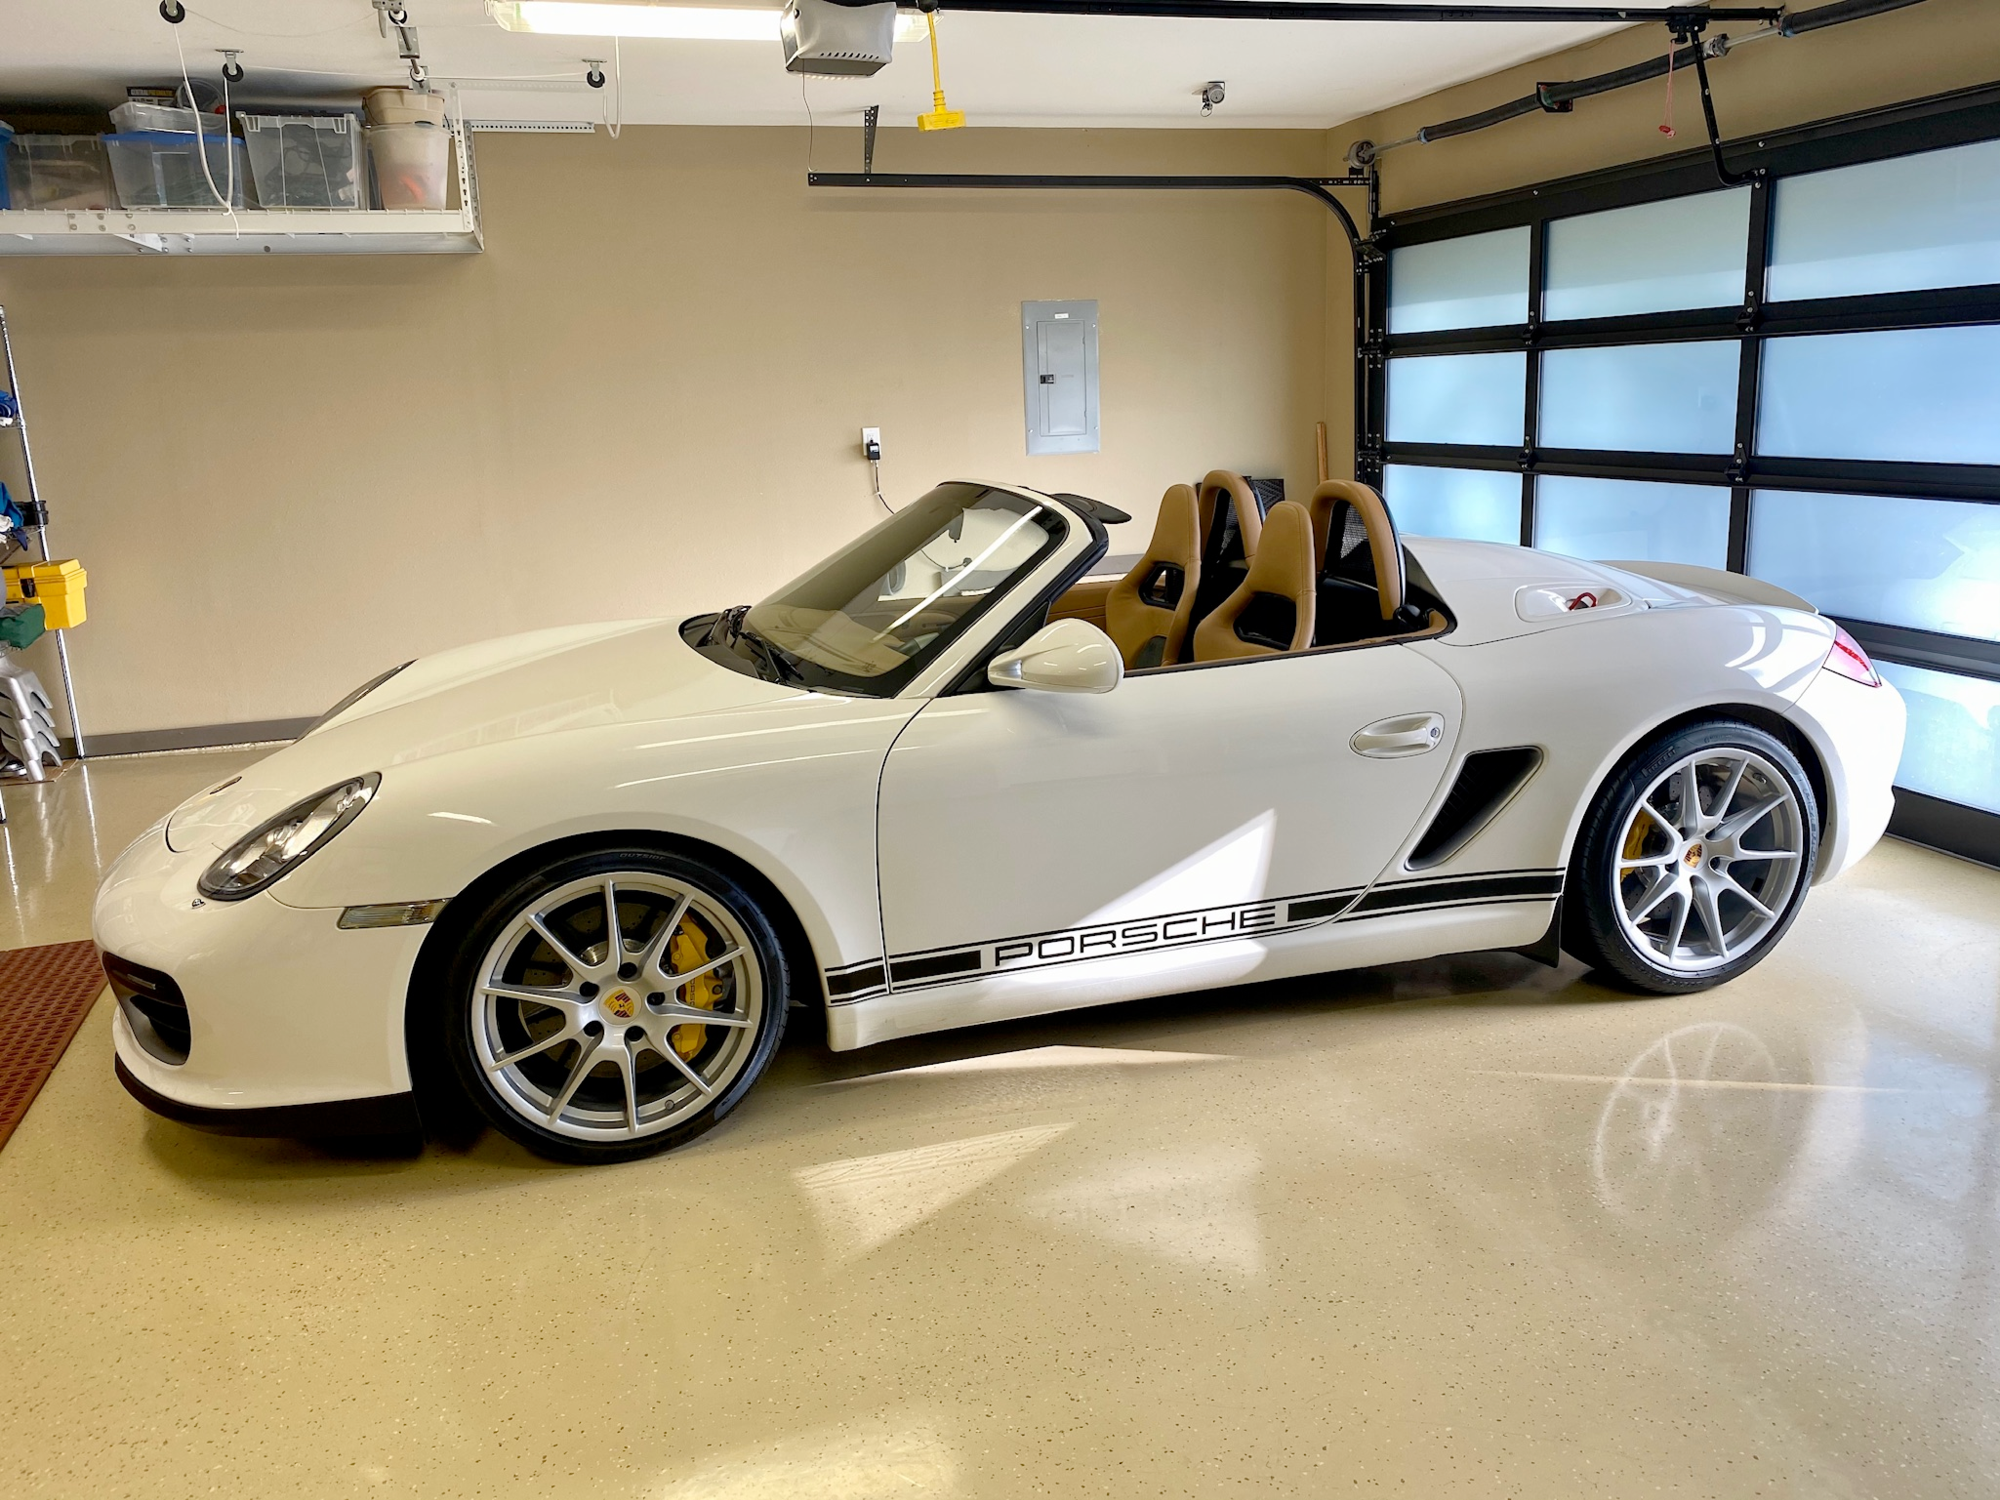 2011 Porsche Boxster - 2011 Boxster Spyder - 6 speed MT - Buckets - AC - Low Miles - Used - VIN WP0CB2A80BS745636 - 2WD - Manual - Convertible - White - Seattle, WA 98059, United States